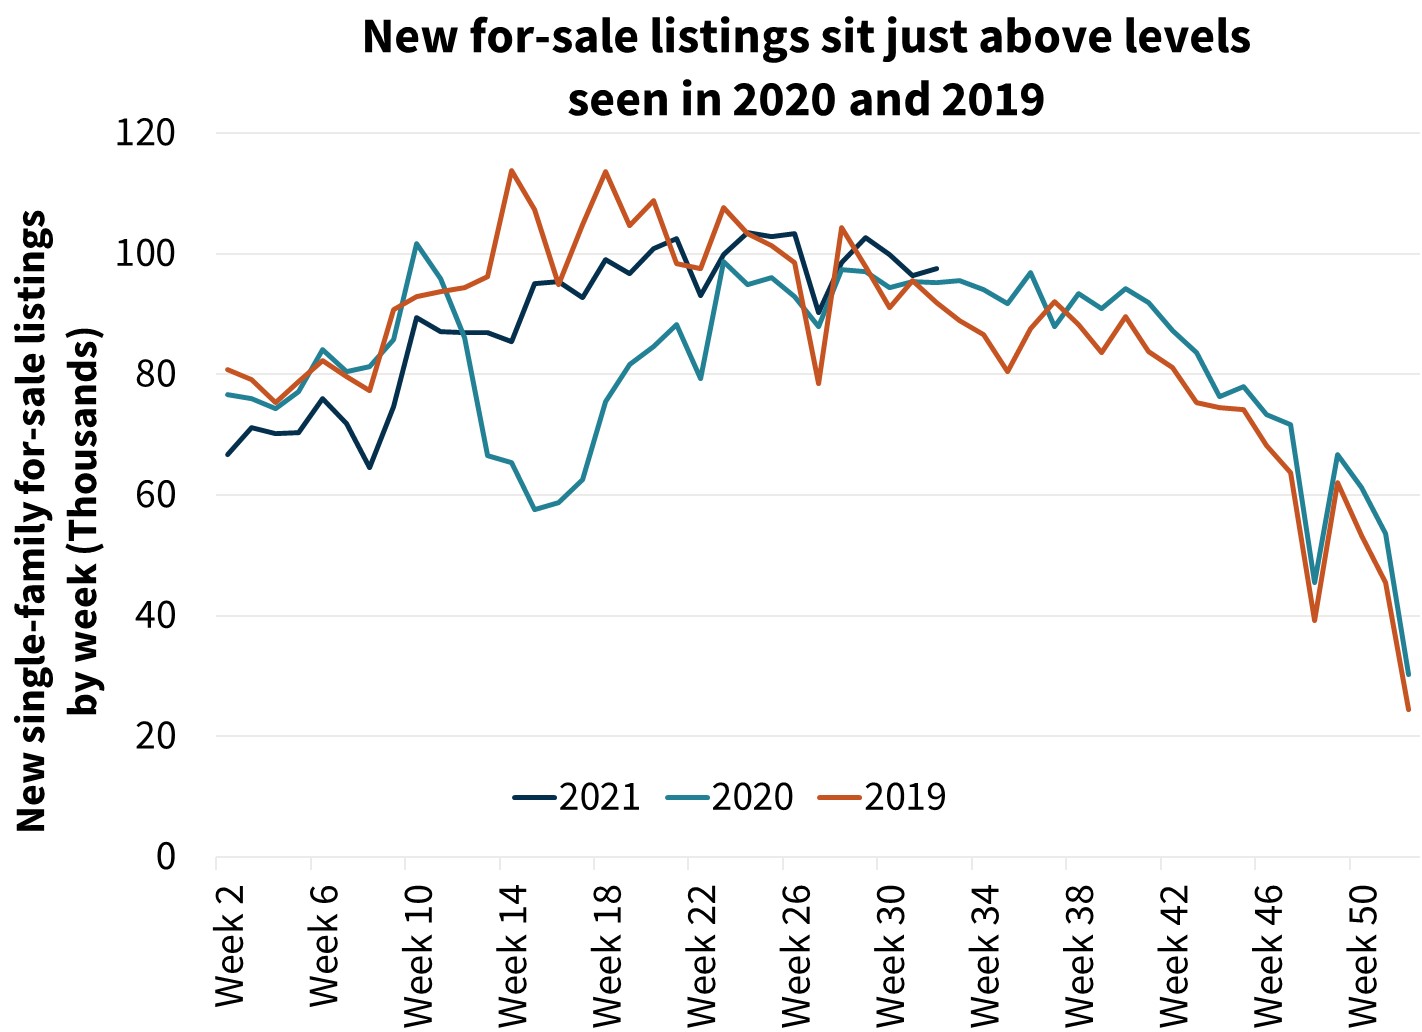  New for sale listings sit just above levels seen in 2020 and 2019
